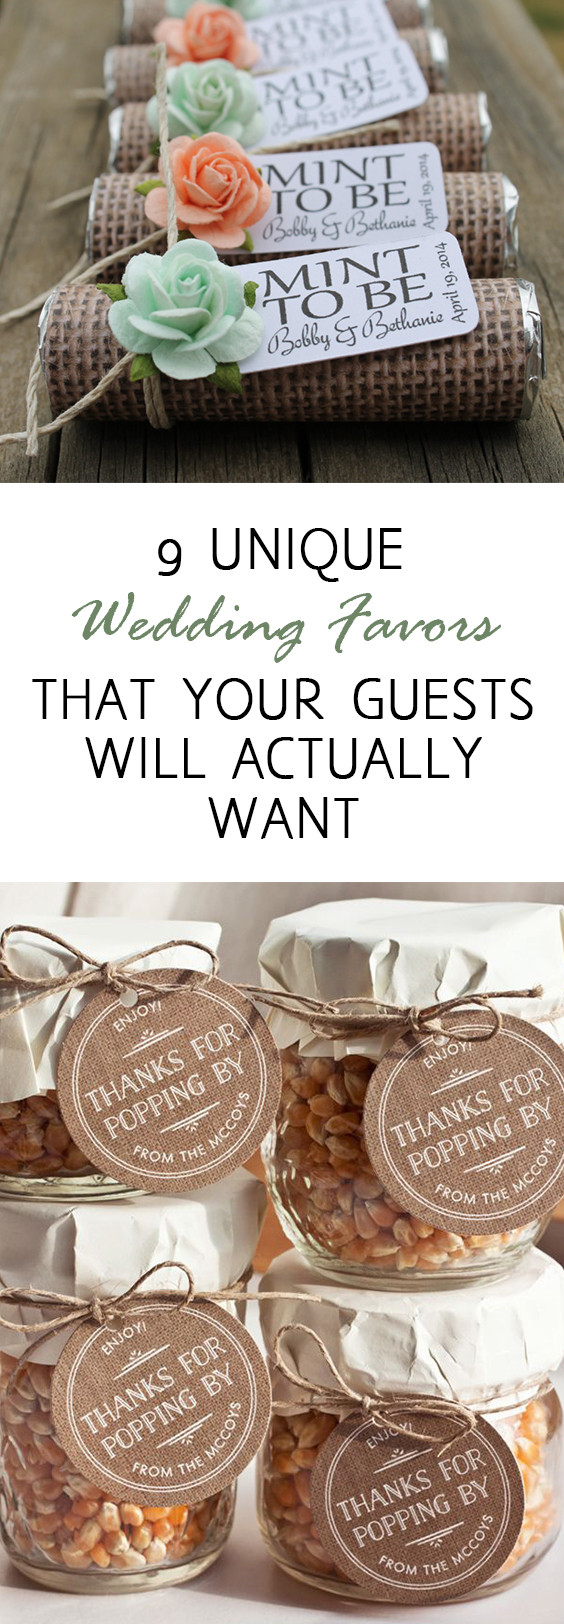 Wedding Favors Unique
 9 Unique Wedding Favors that Your Guests Will Actually